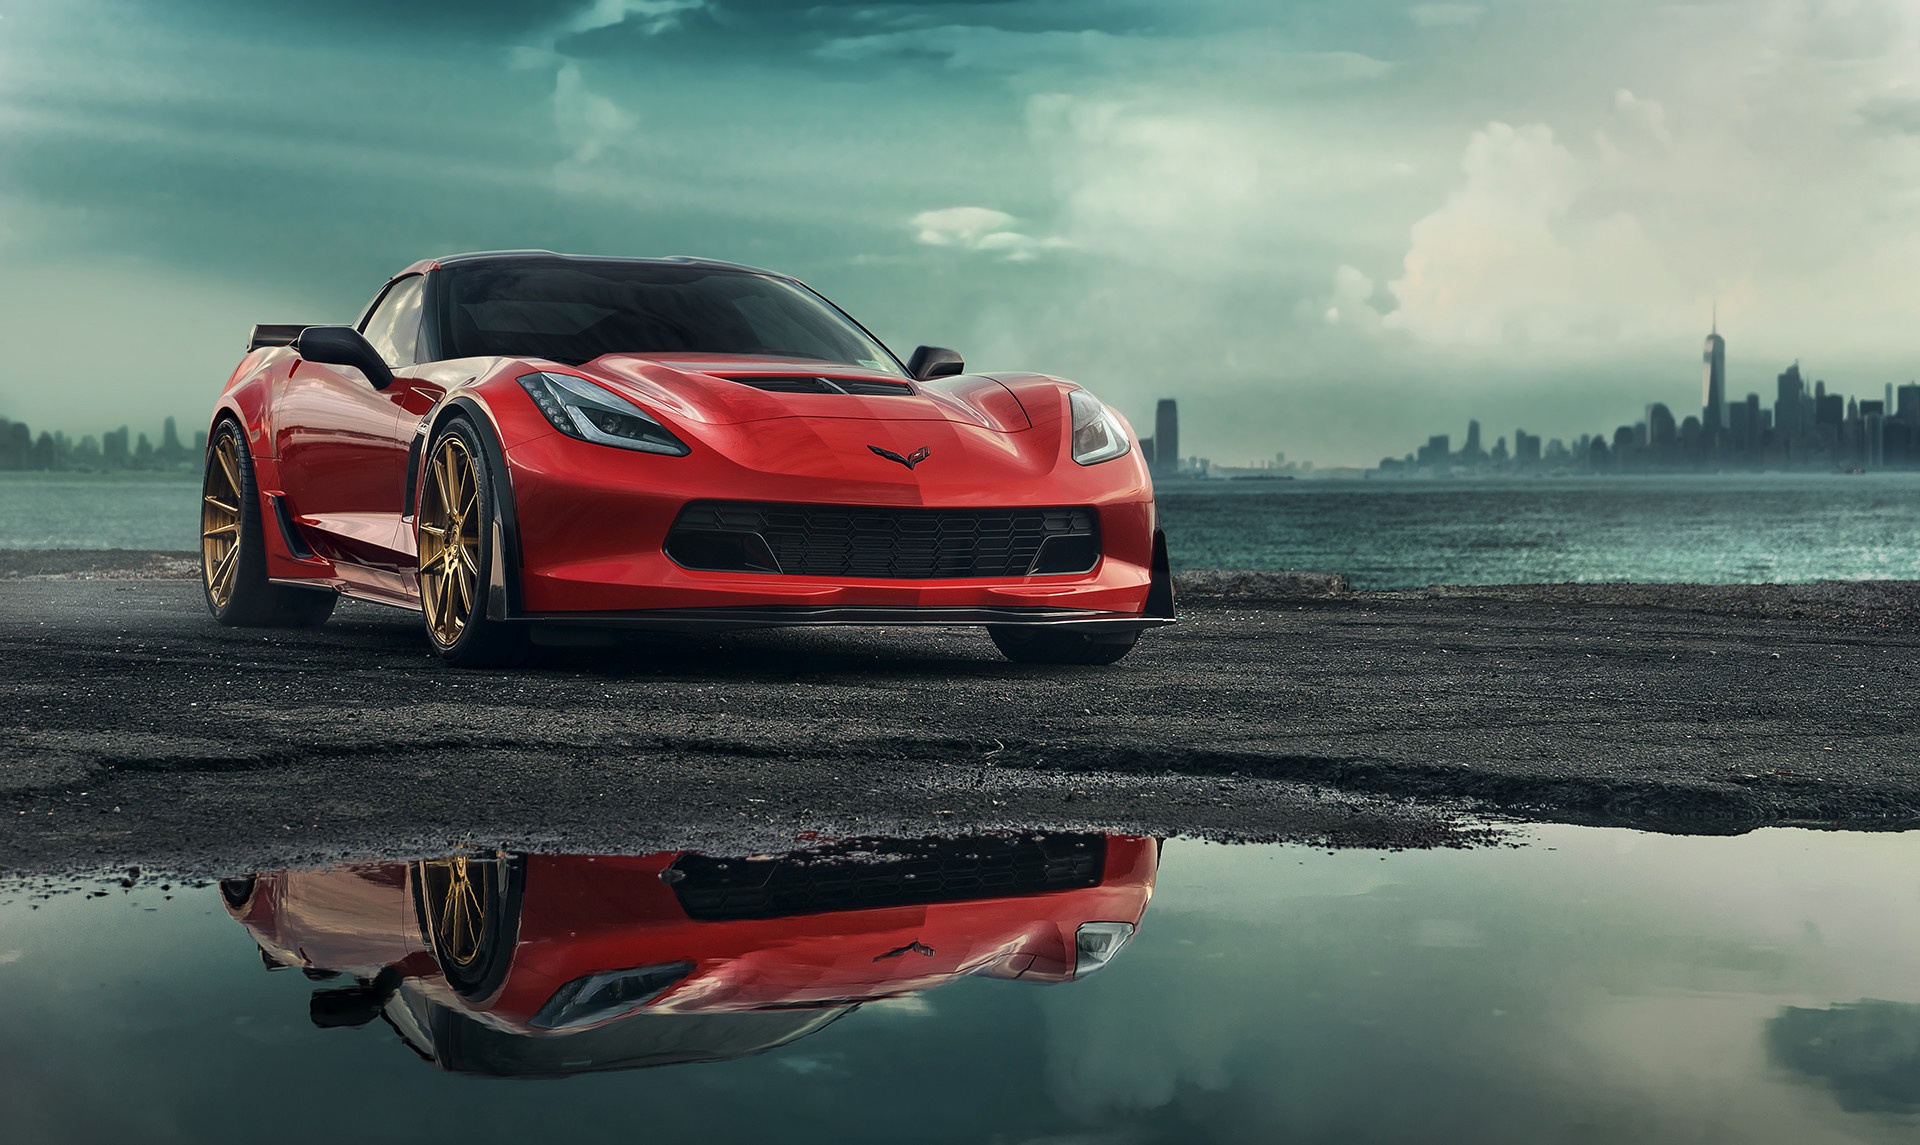 Car Chevrolet Chevrolet Corvette Chevrolet Corvette C7 Red Car Reflection Sport Car Vehicle 1920x1145